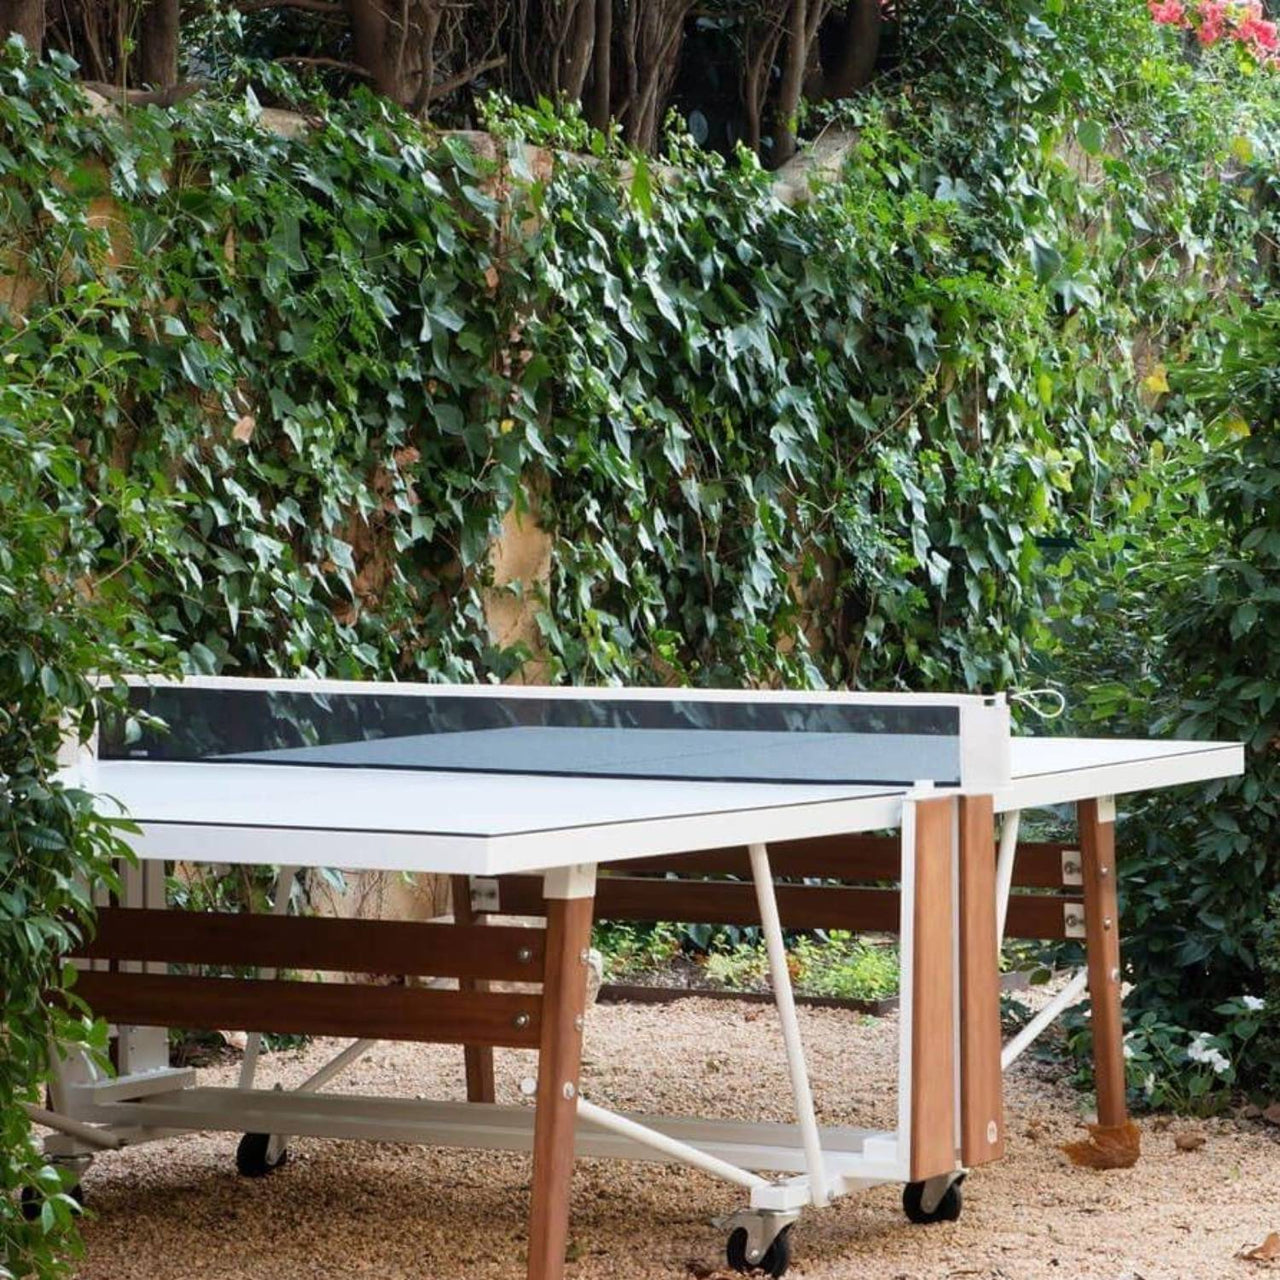 Outdoor Ping Pong Tables